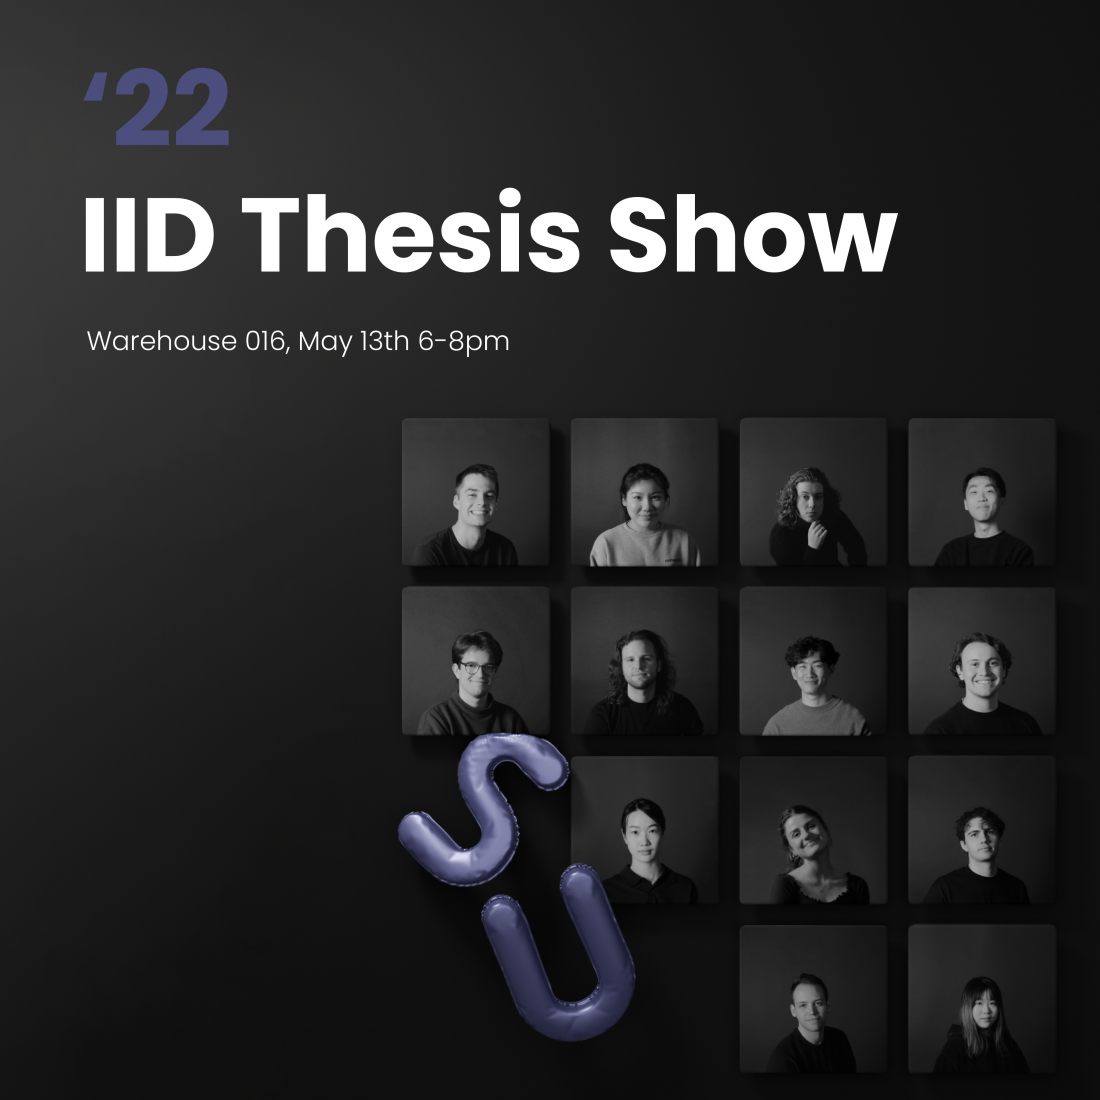 IID Thesis Show poster